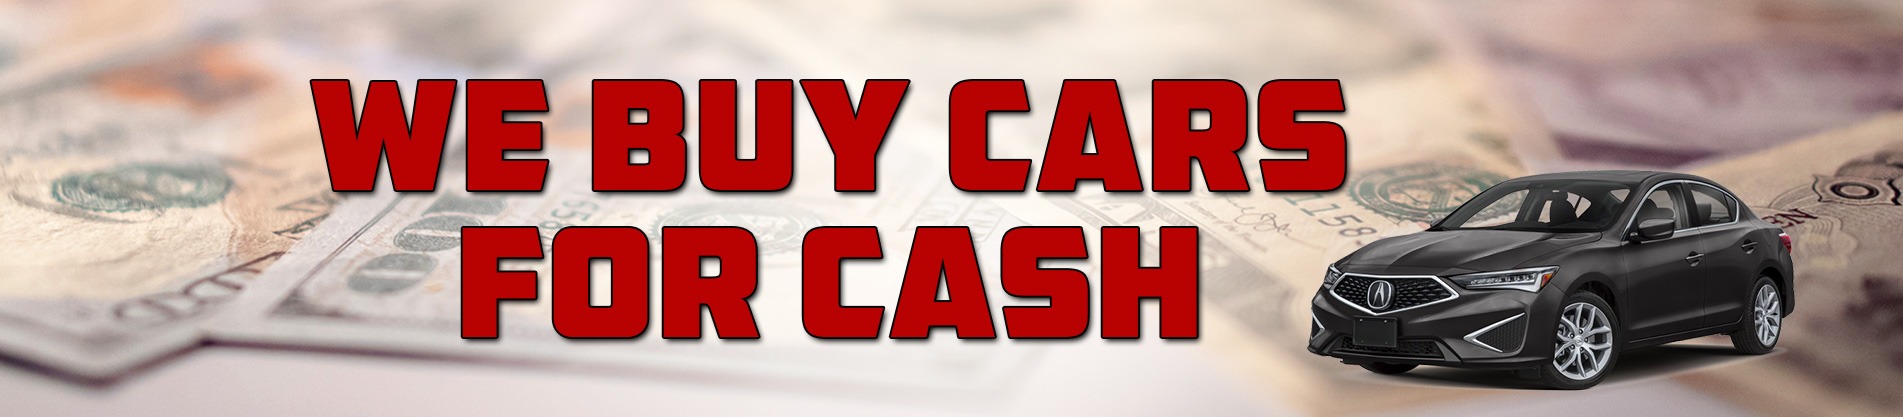 WE BUY CARS FOR CASH